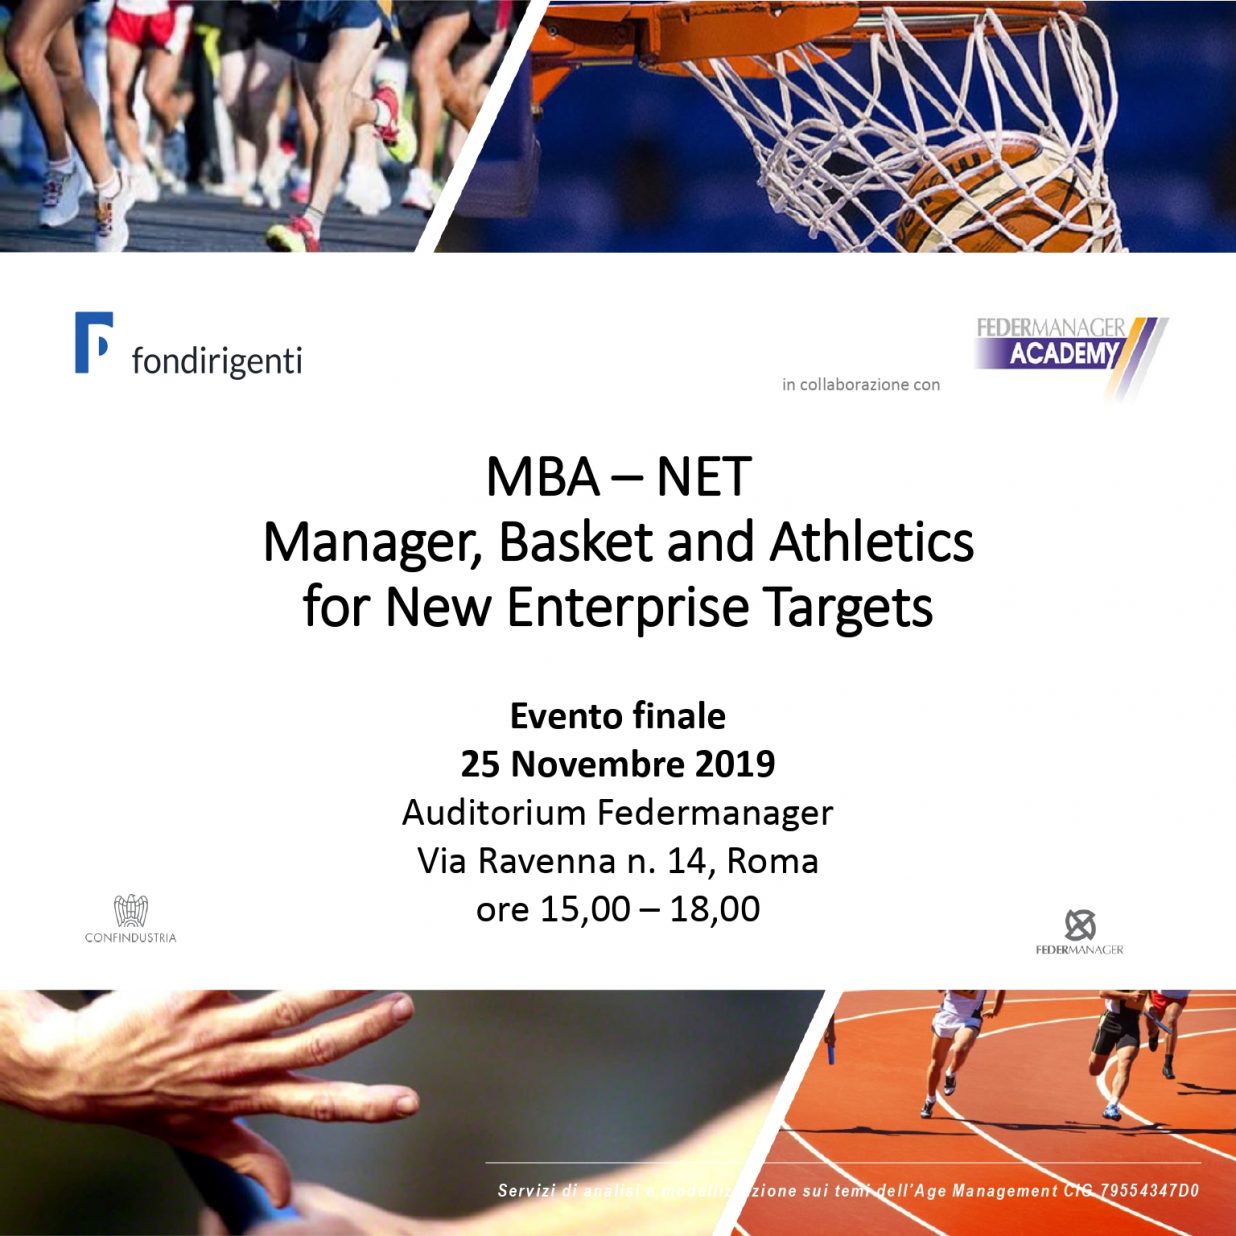 Save the date: Evento finale MBA-NET